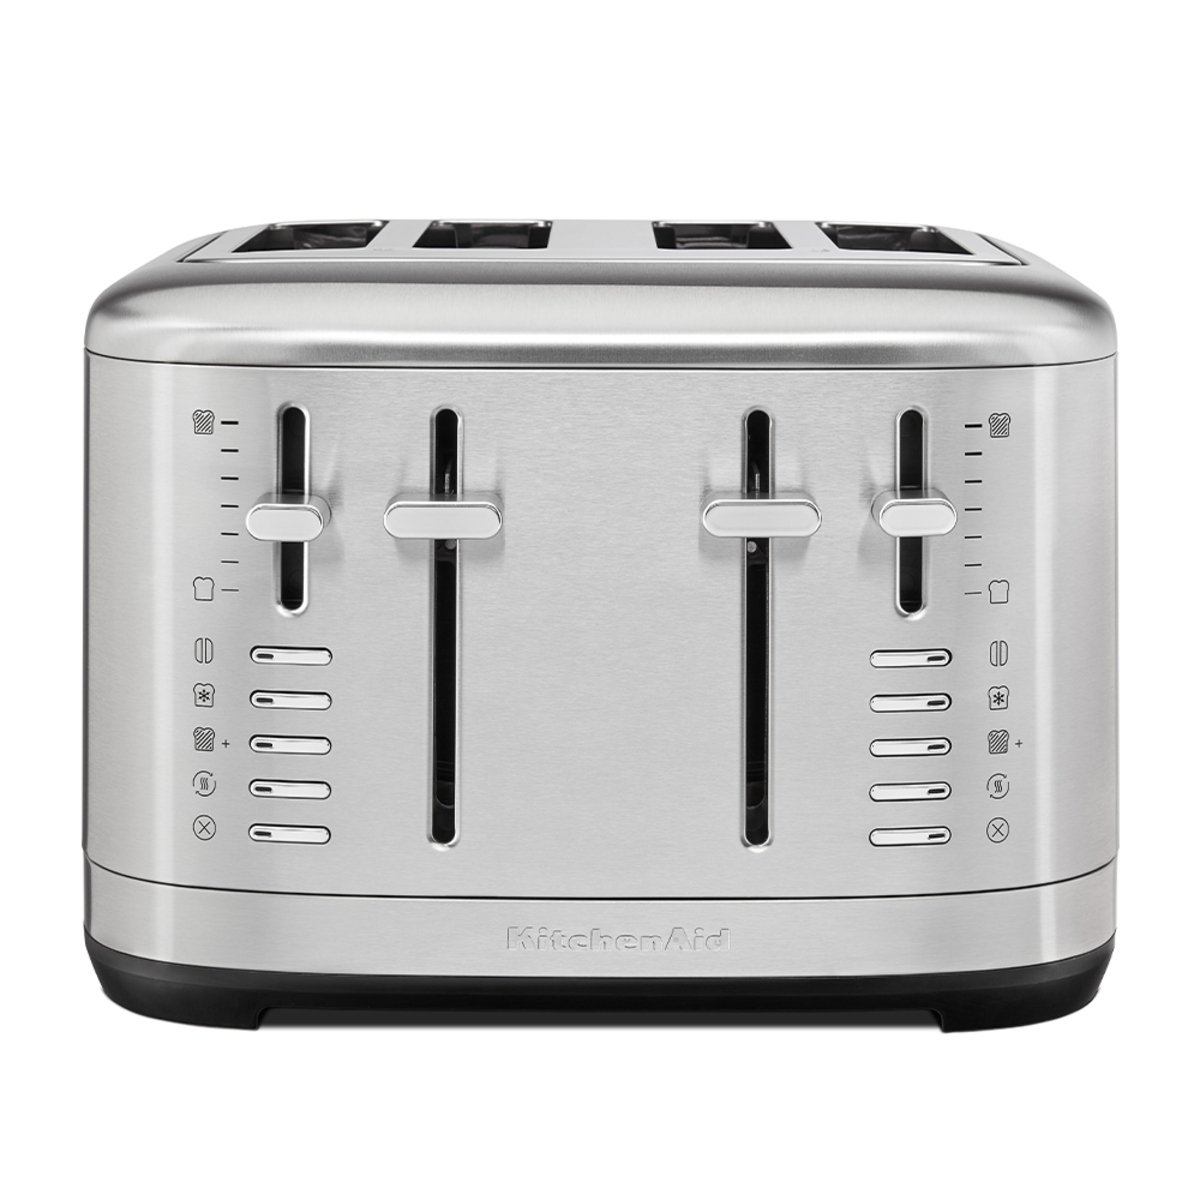 KitchenAid 5KMT4109BSX Manual Control 4 Slot Toaster, Stainless Steel